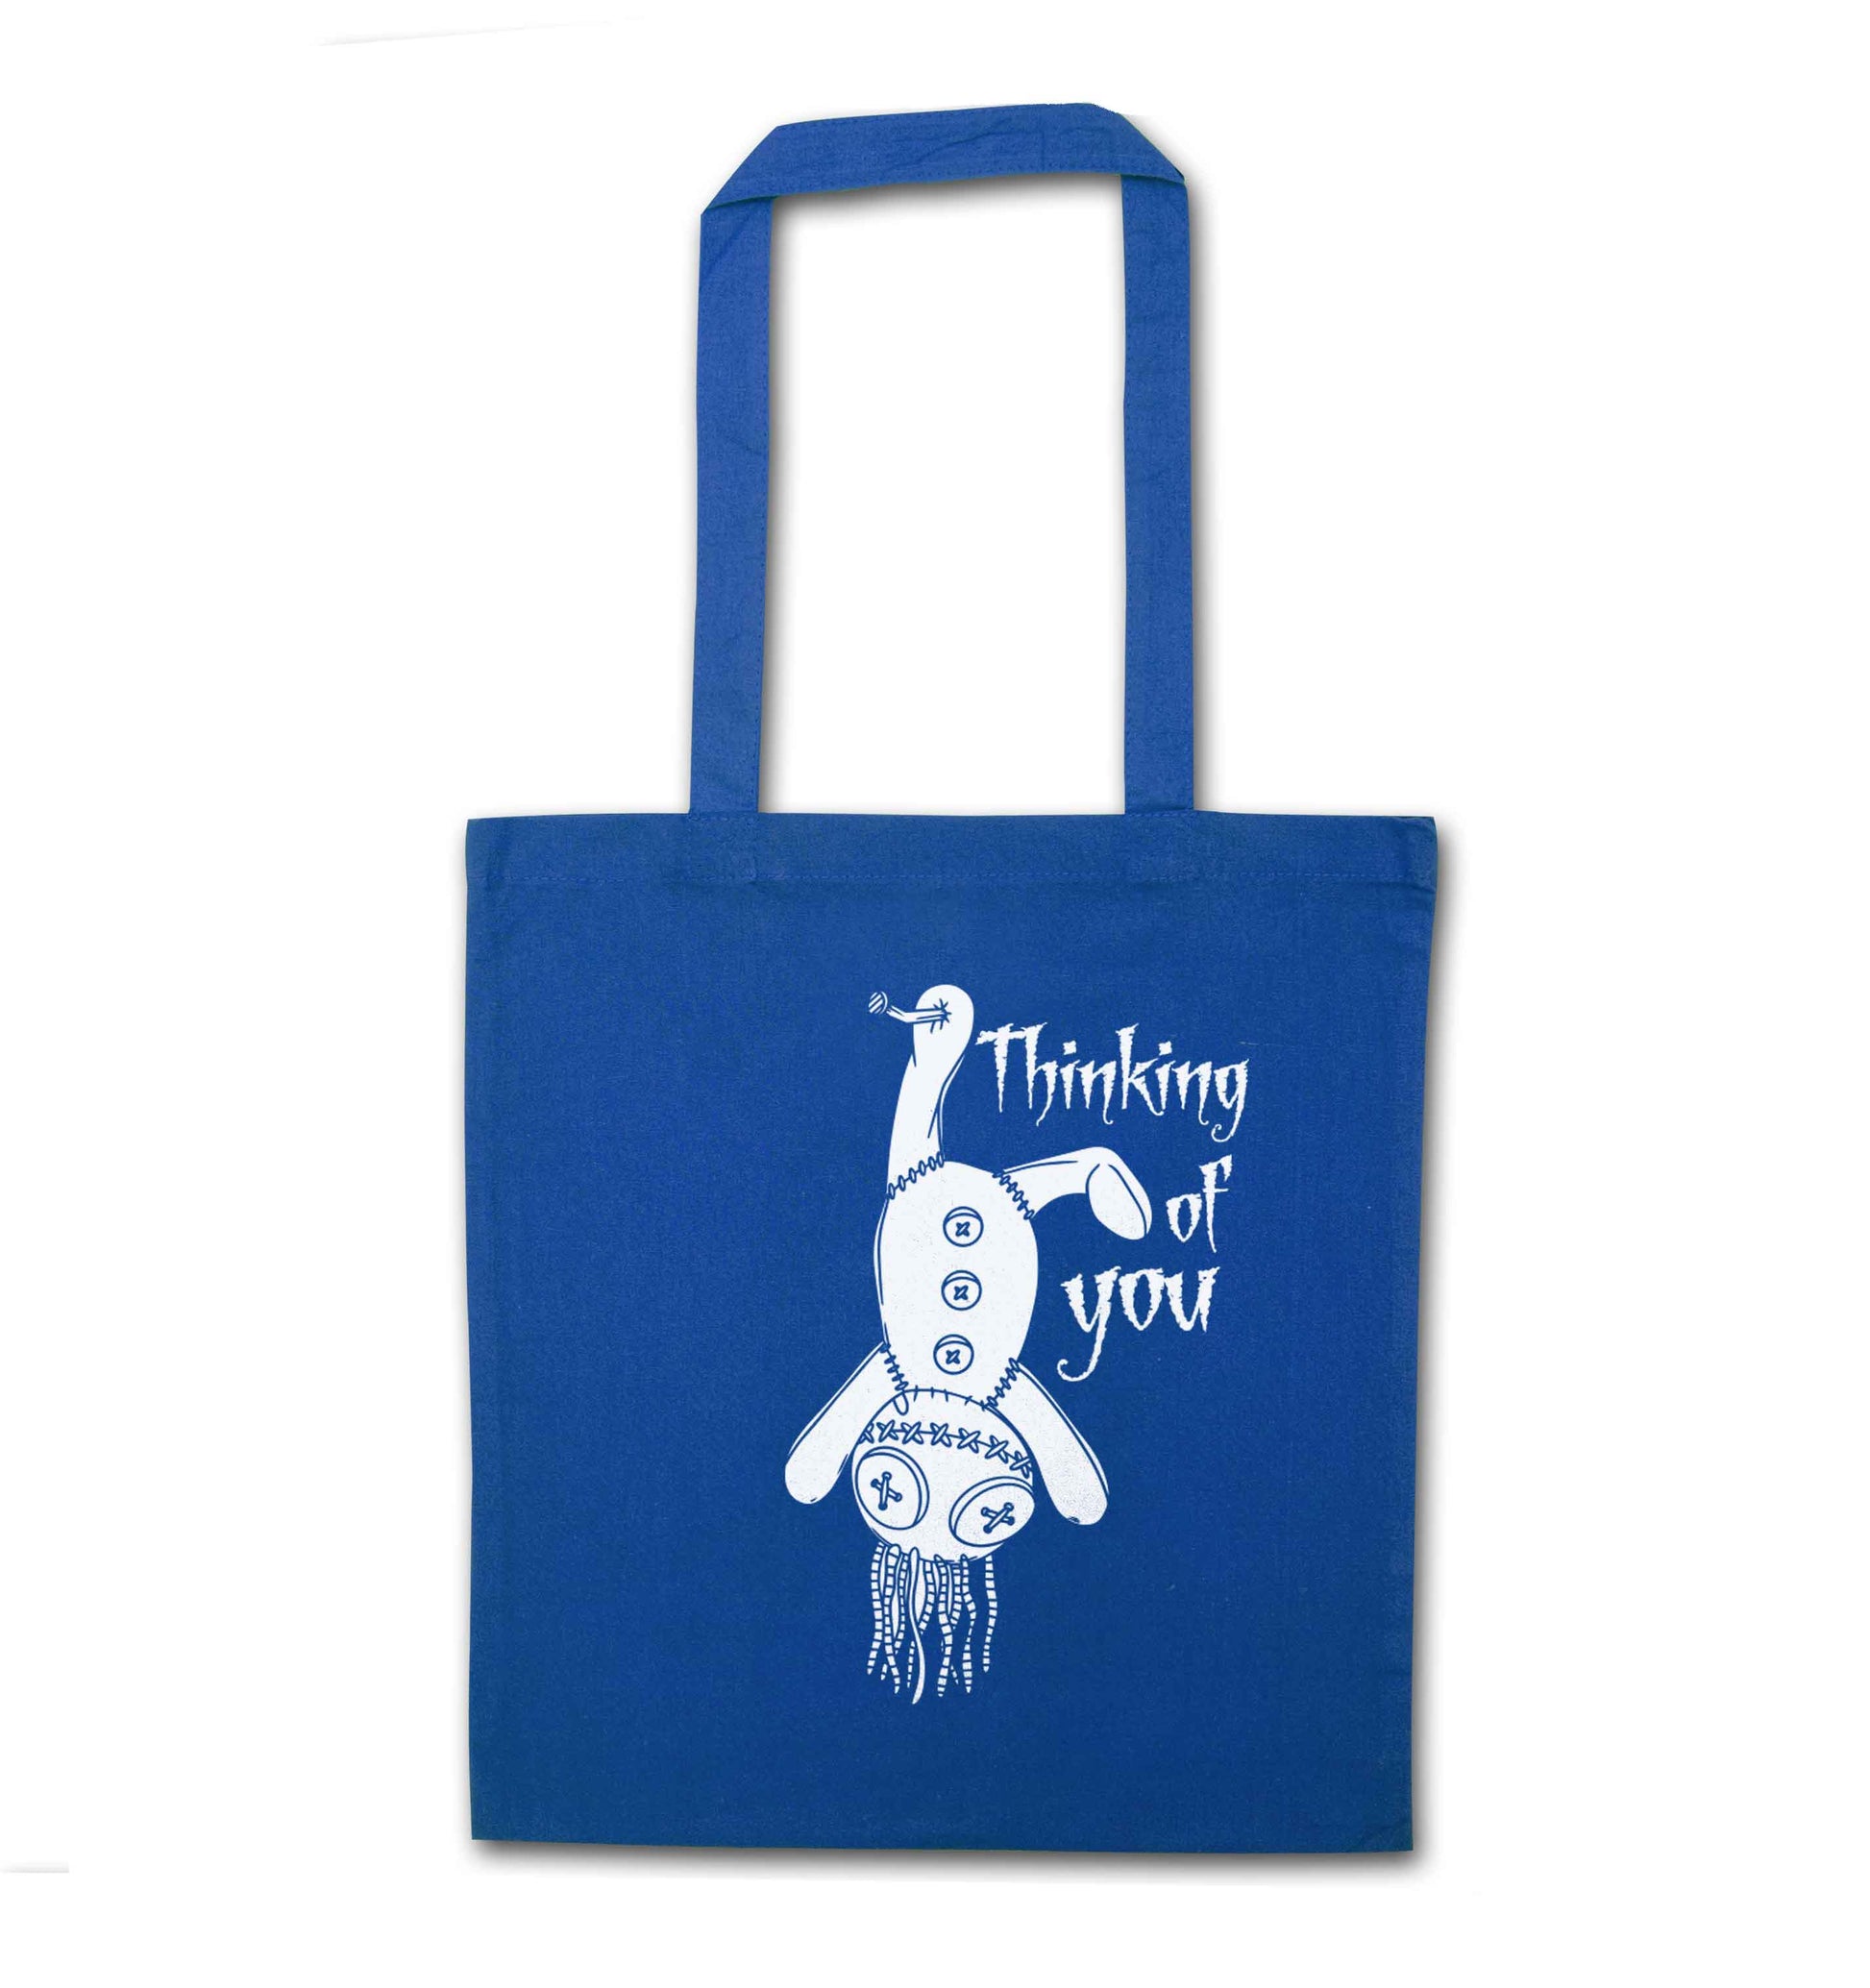 Thinking of you blue tote bag